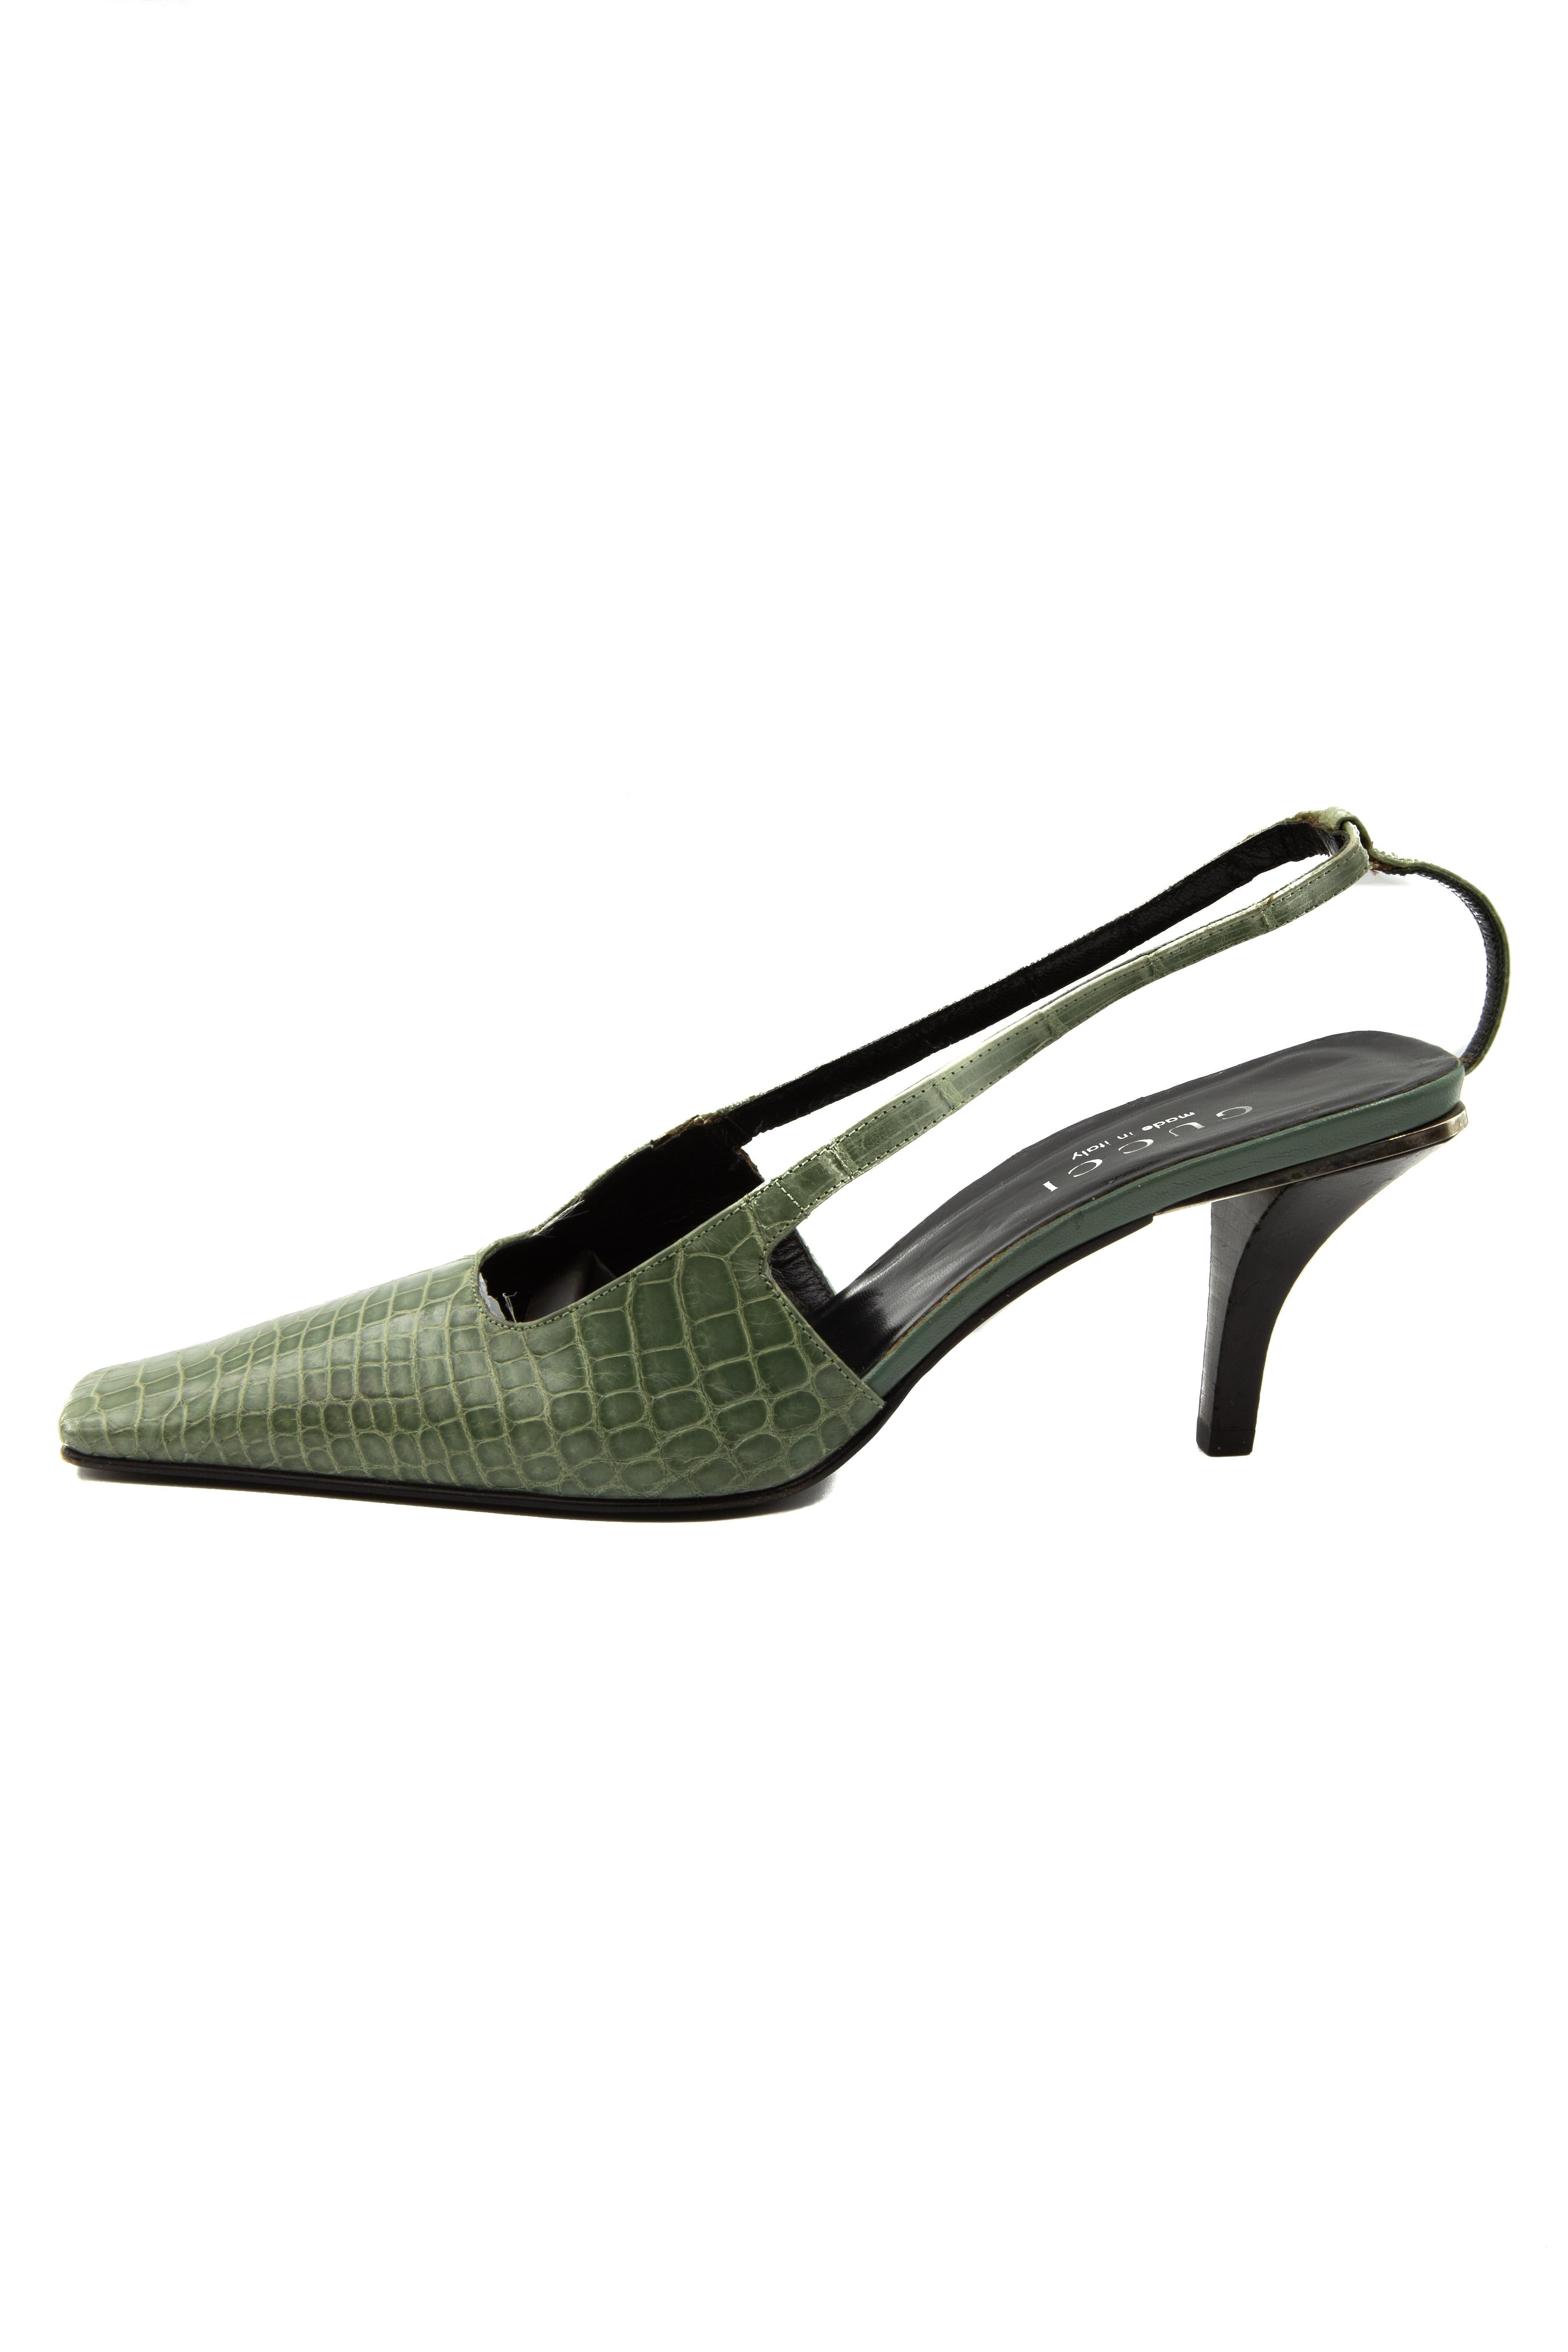 Tom Ford for Gucci Green Crocodile Mule Heels
S/S 1998 Collection
Size 36.5C
Limited Edition, Genuine Crocodile, Crystal G on One Heel, Leather Insole & Sole, Heel Height - 3 inches.
Made in Italy.